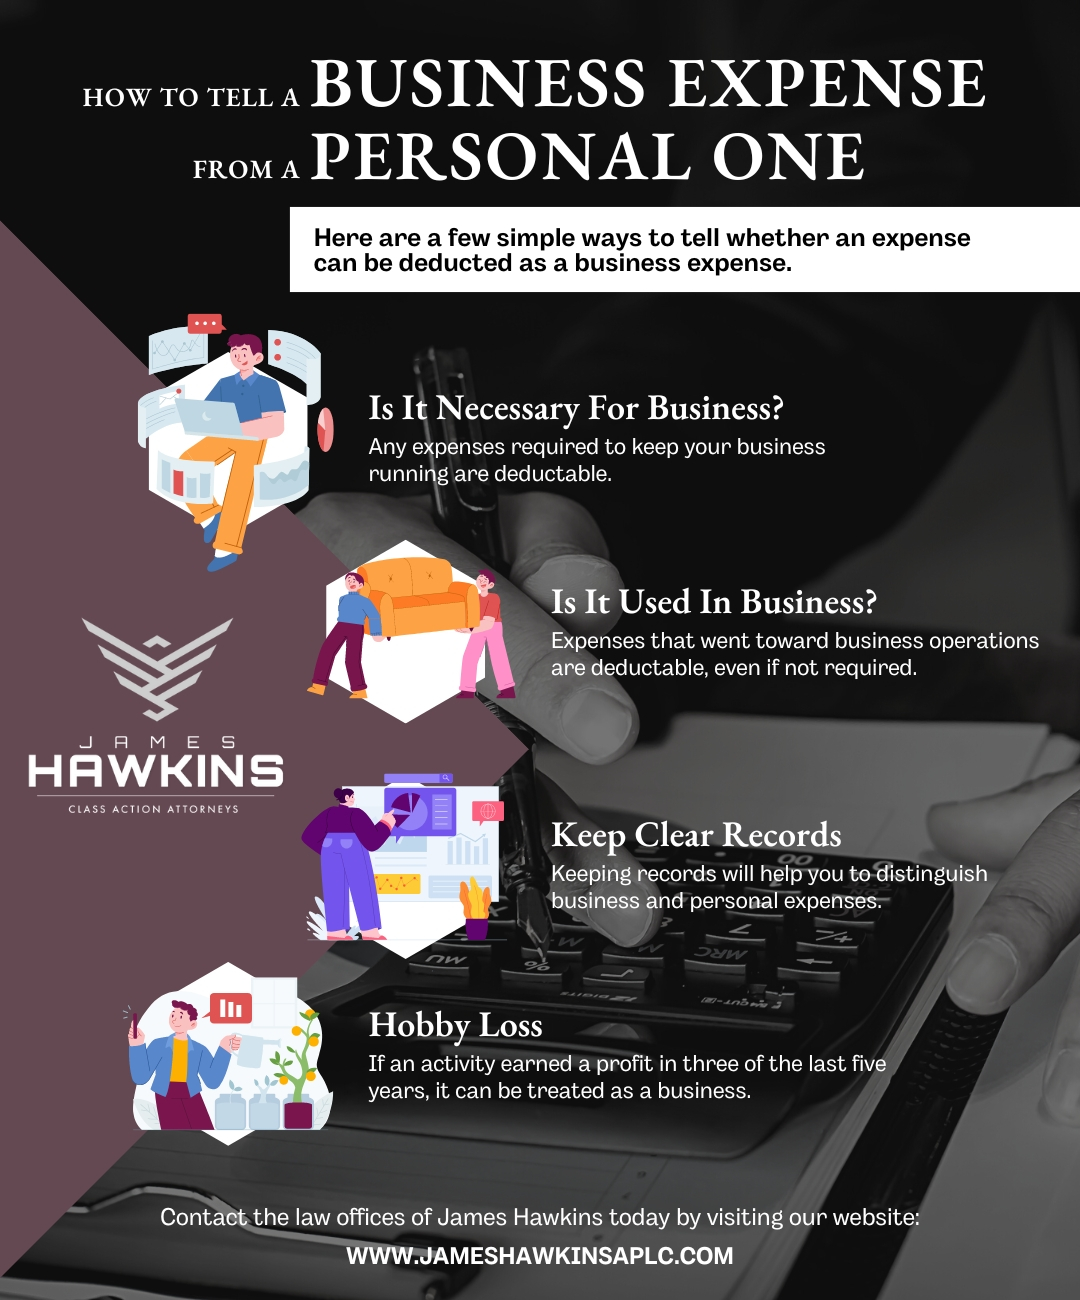 M32821 - Infographic - How To Tell a Business Expense From a Personal One.jpg